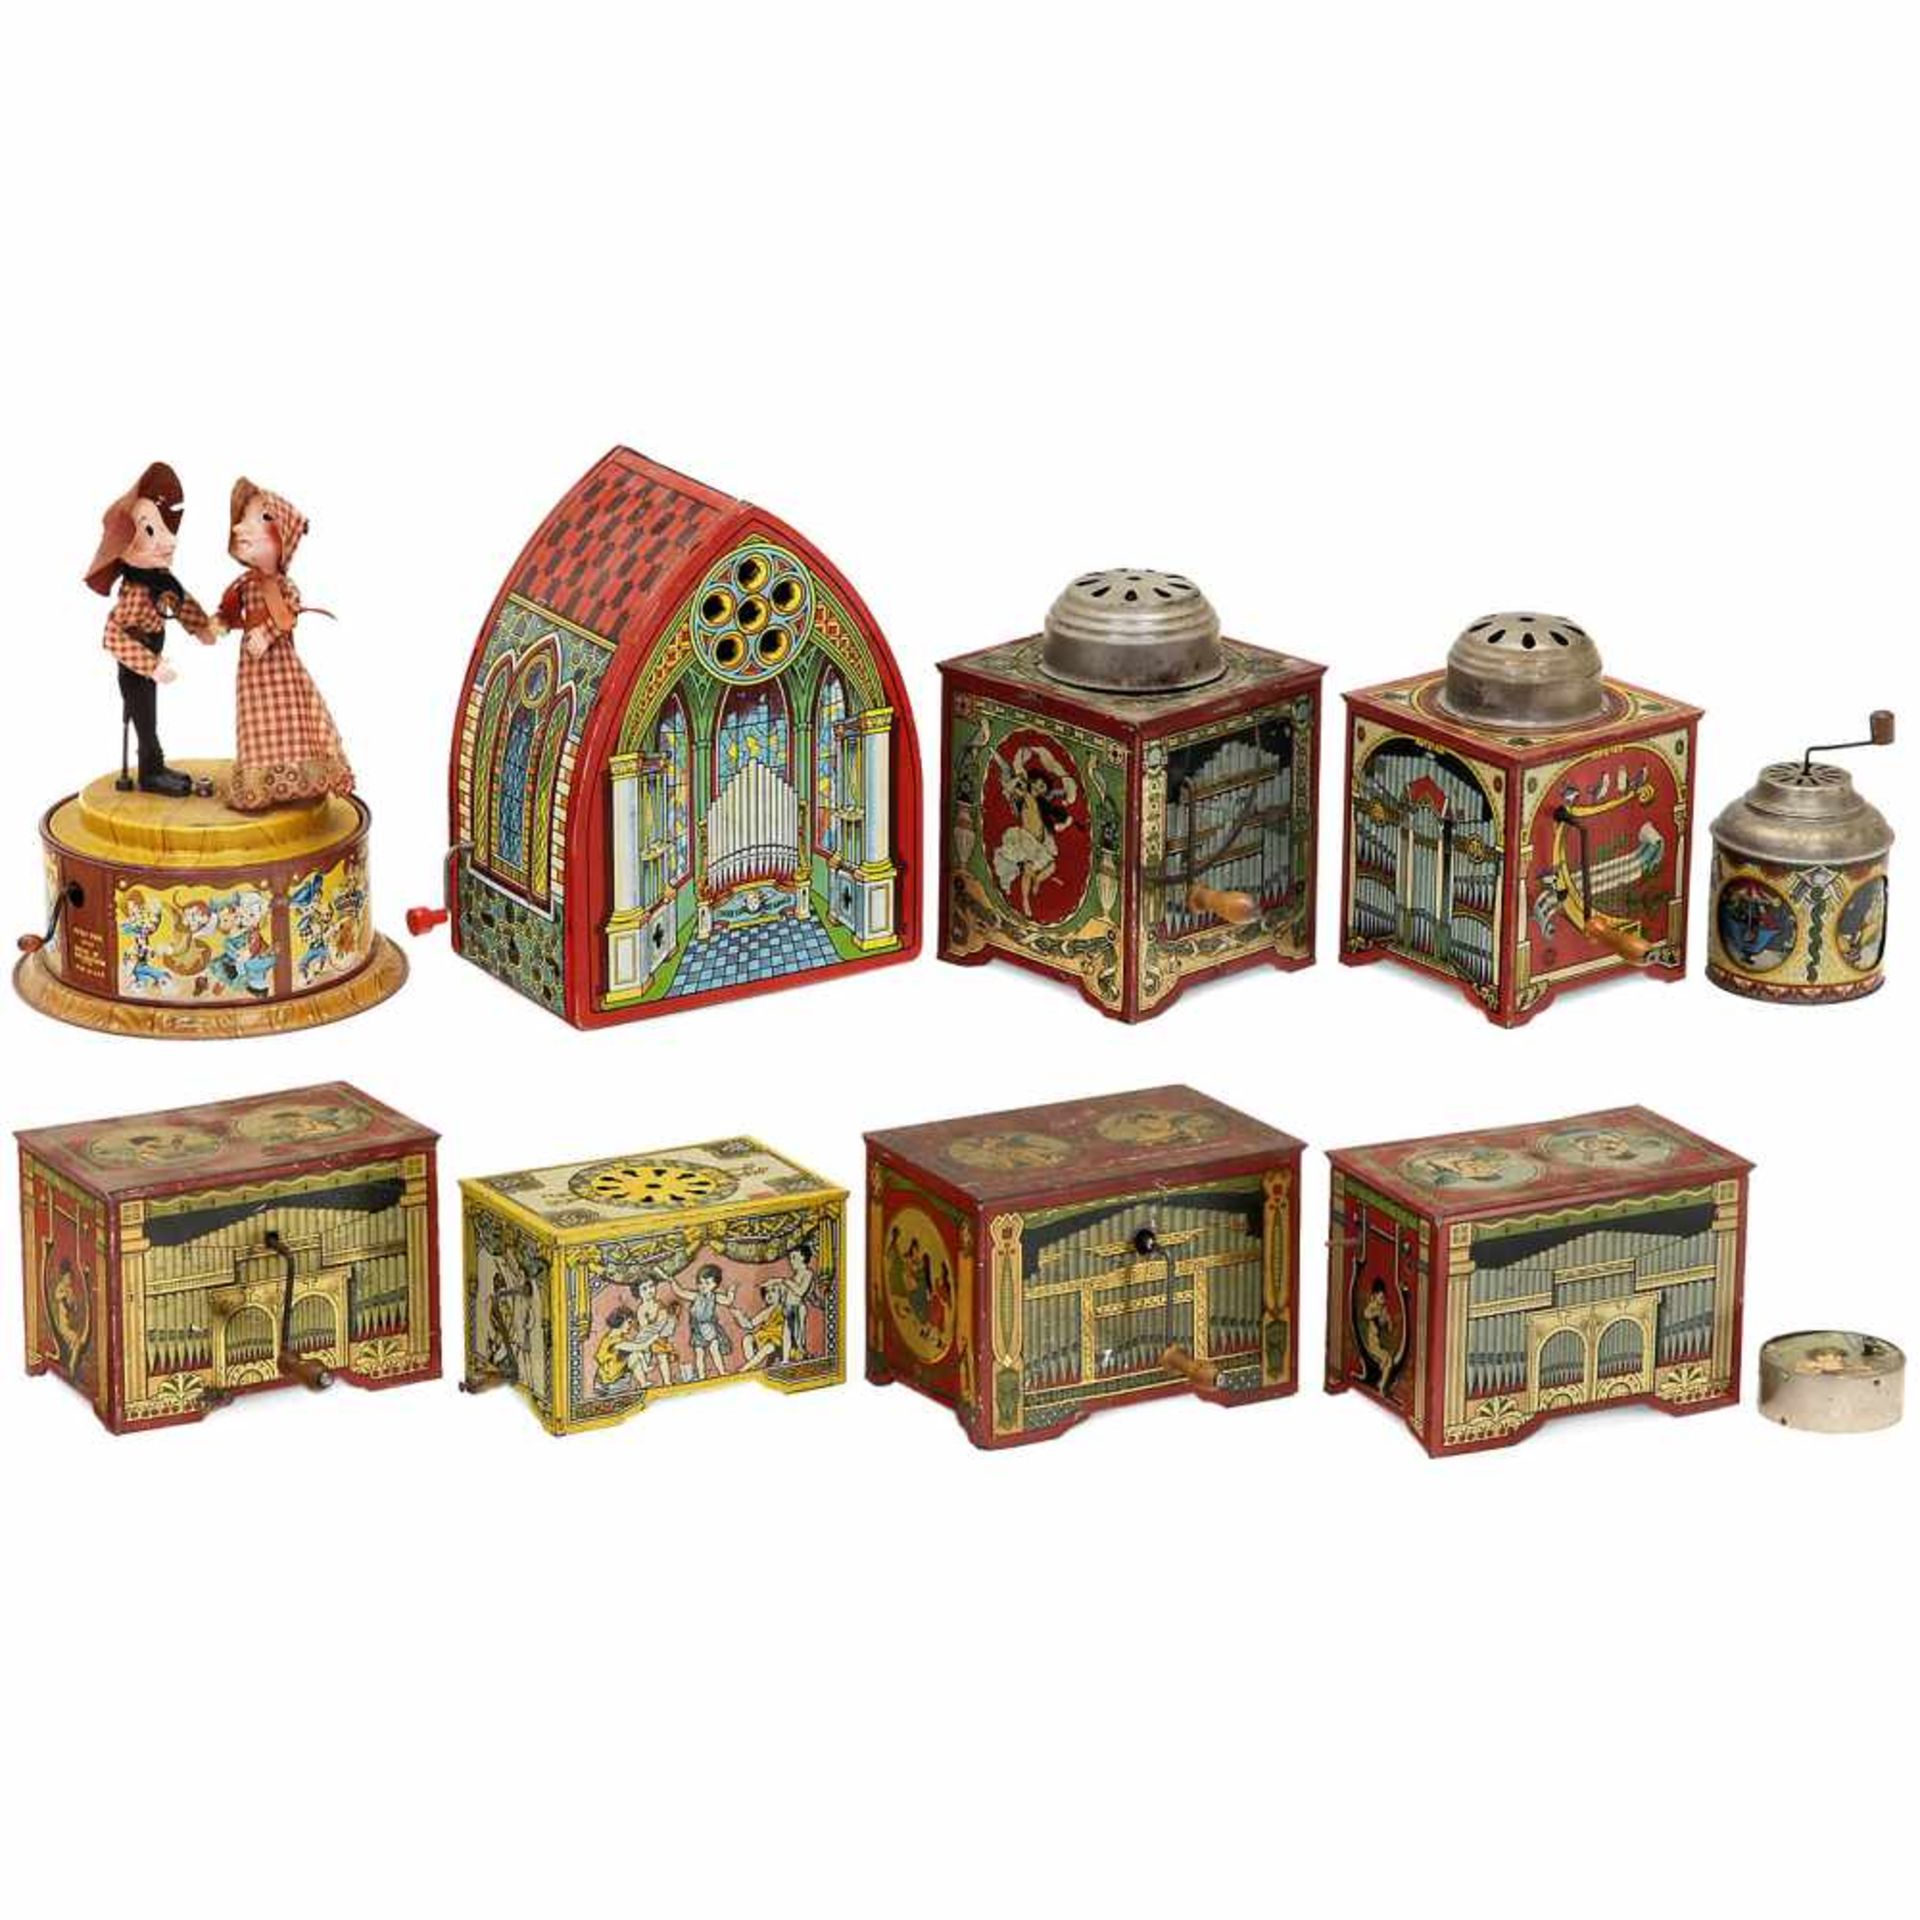 5 Toy Organs and Other Items, c. 1930Lithographed tin, hand-cranked, with small "turbines" and